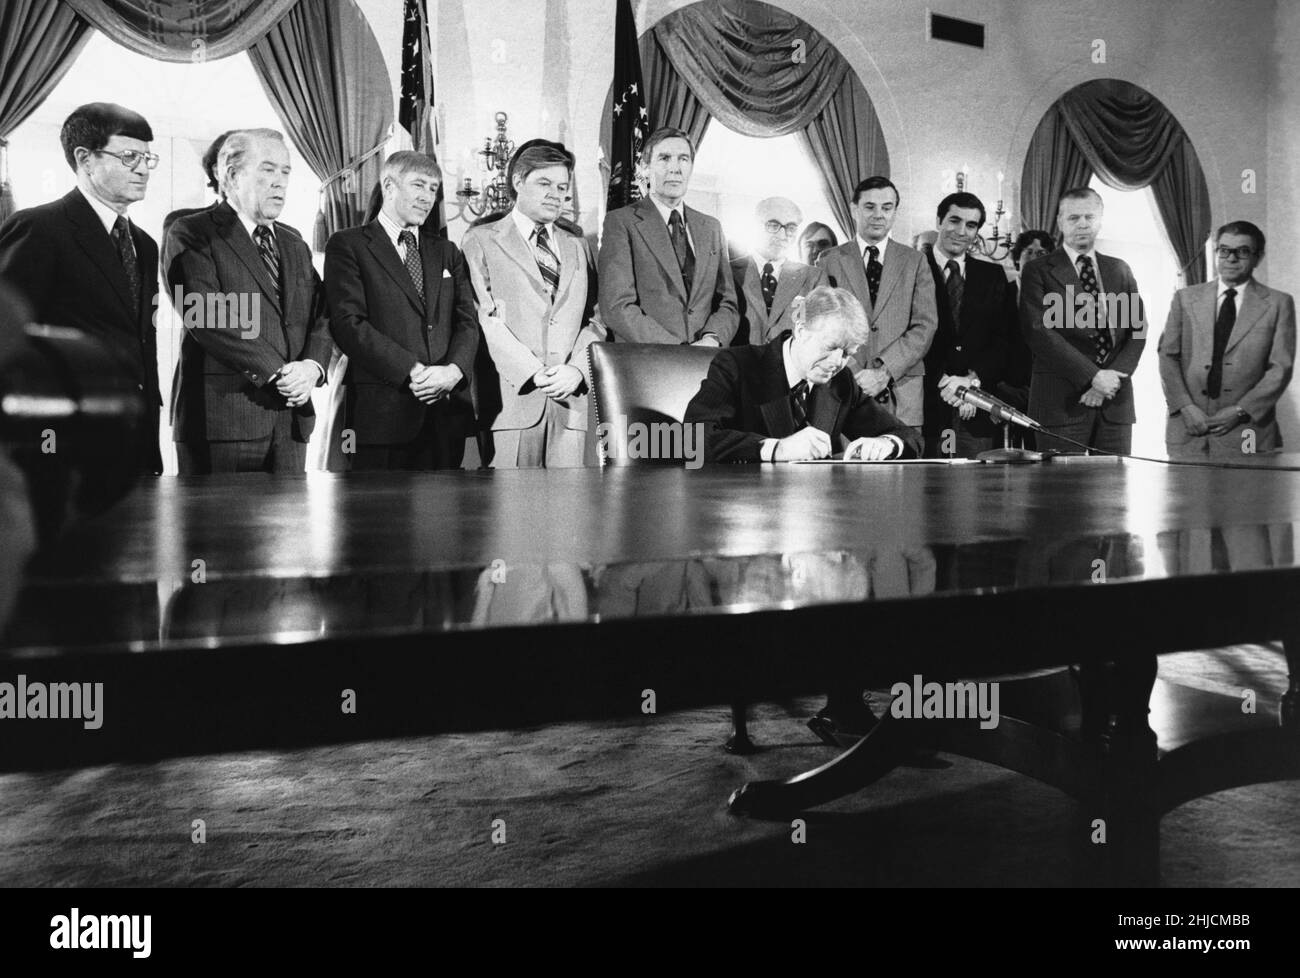 President Jimmy Carter (born October 1, 1924), surrounded by members of Congress, signs a bill into law. Circa 1980. Stock Photo